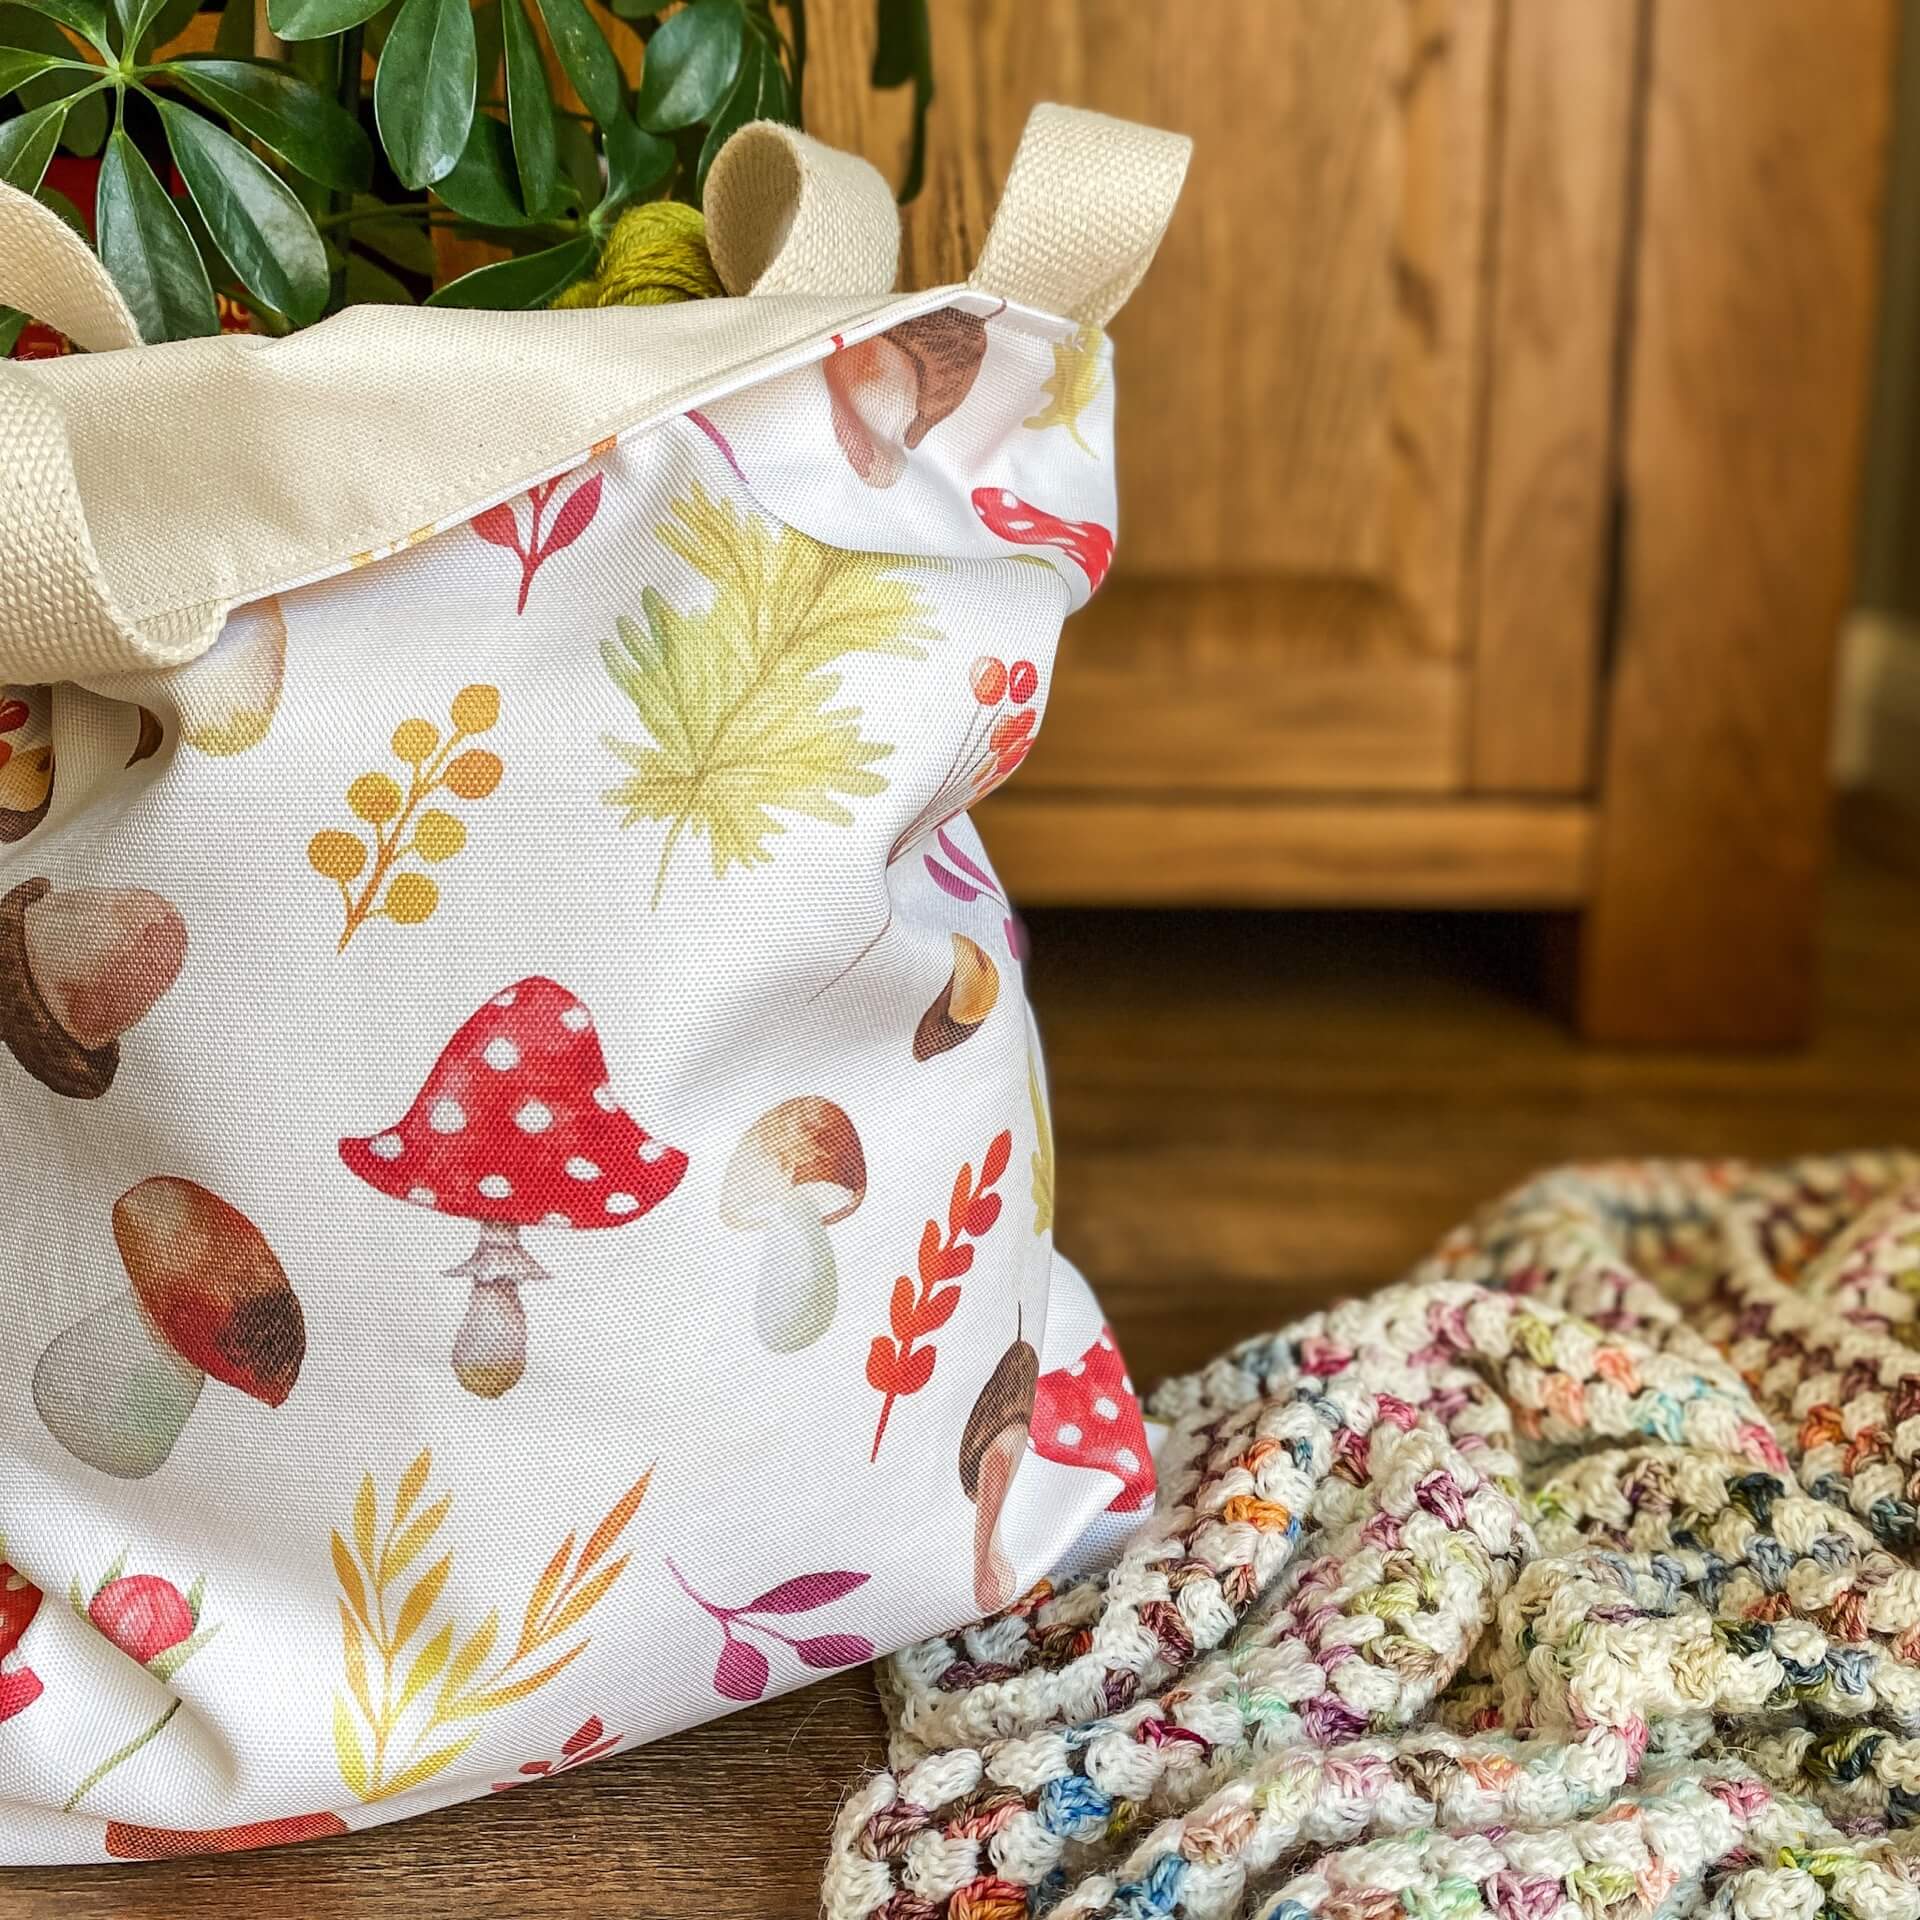 An autumnal tote bag holding yarn is on the floor next to a crochet blanket and a house plant. The bag is made from a white fabric that has lots of colourful images from an autumnal woodland printed on it. 